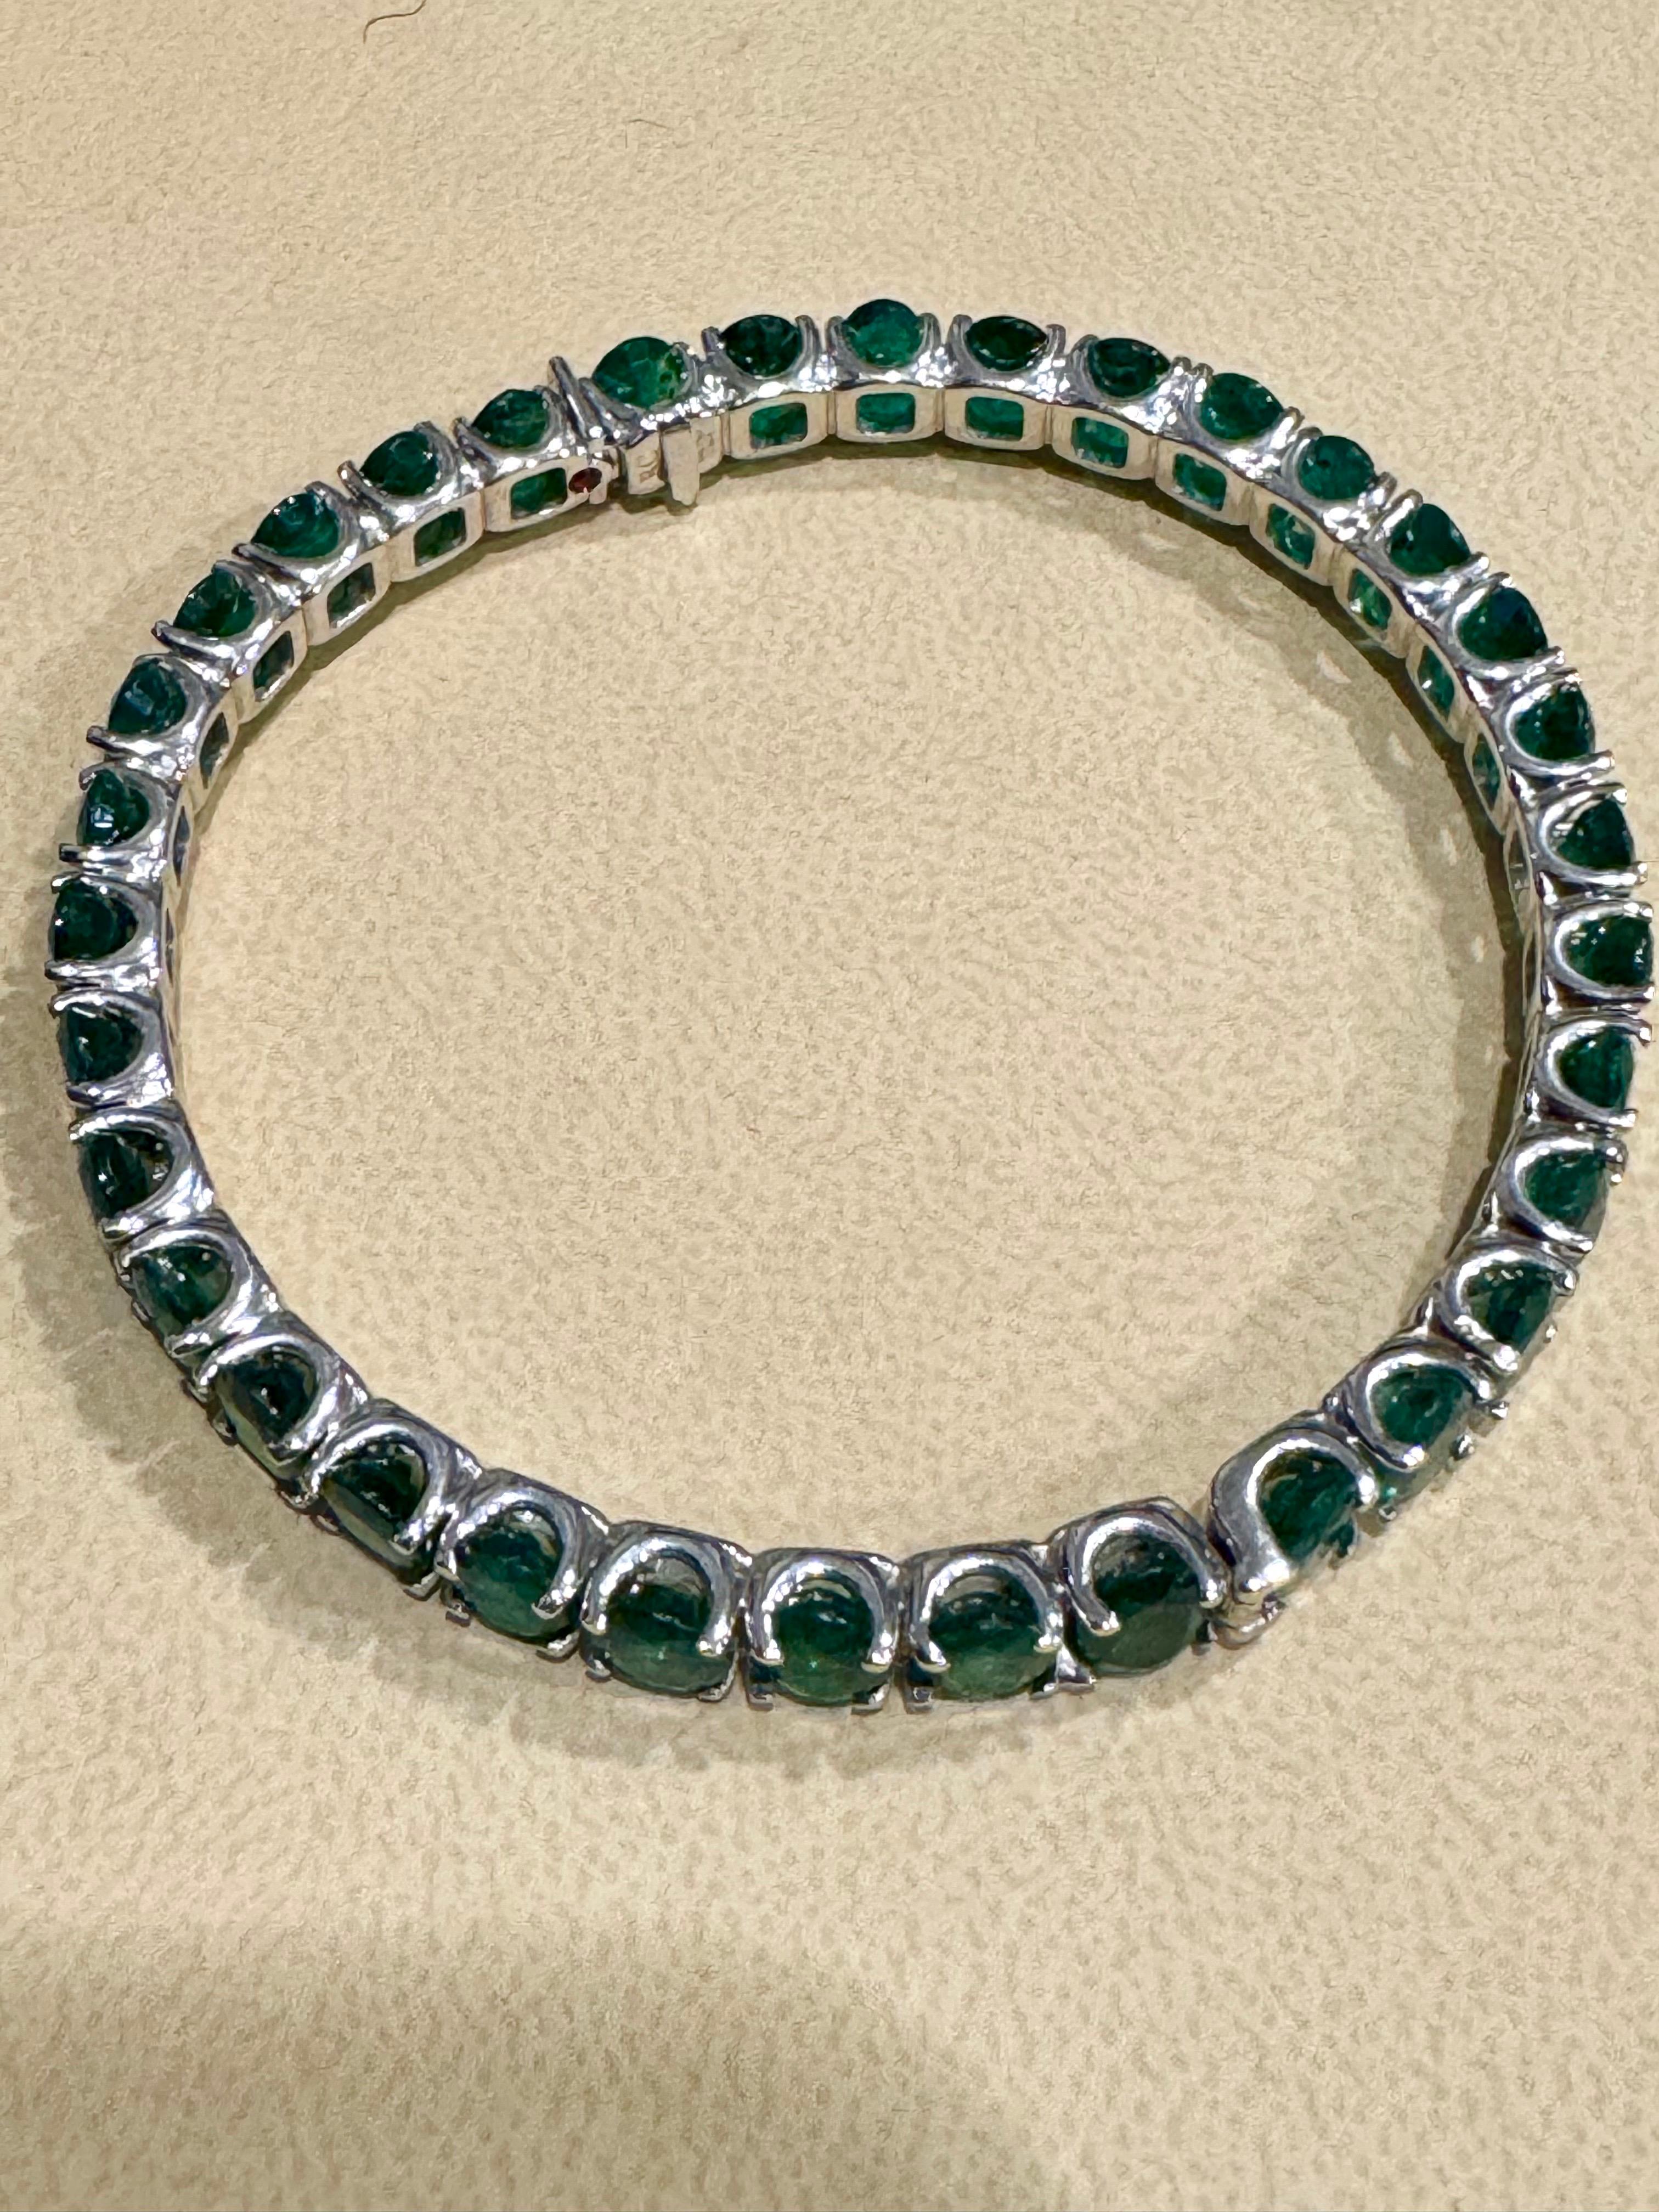 For an affordable price, indulge in designer elegance with the Roberto Coin bangle bracelet, a signature piece from the renowned designer. Originating from Zambia, this exquisite piece features approximately 25 carats of oval emeralds, totaling 37